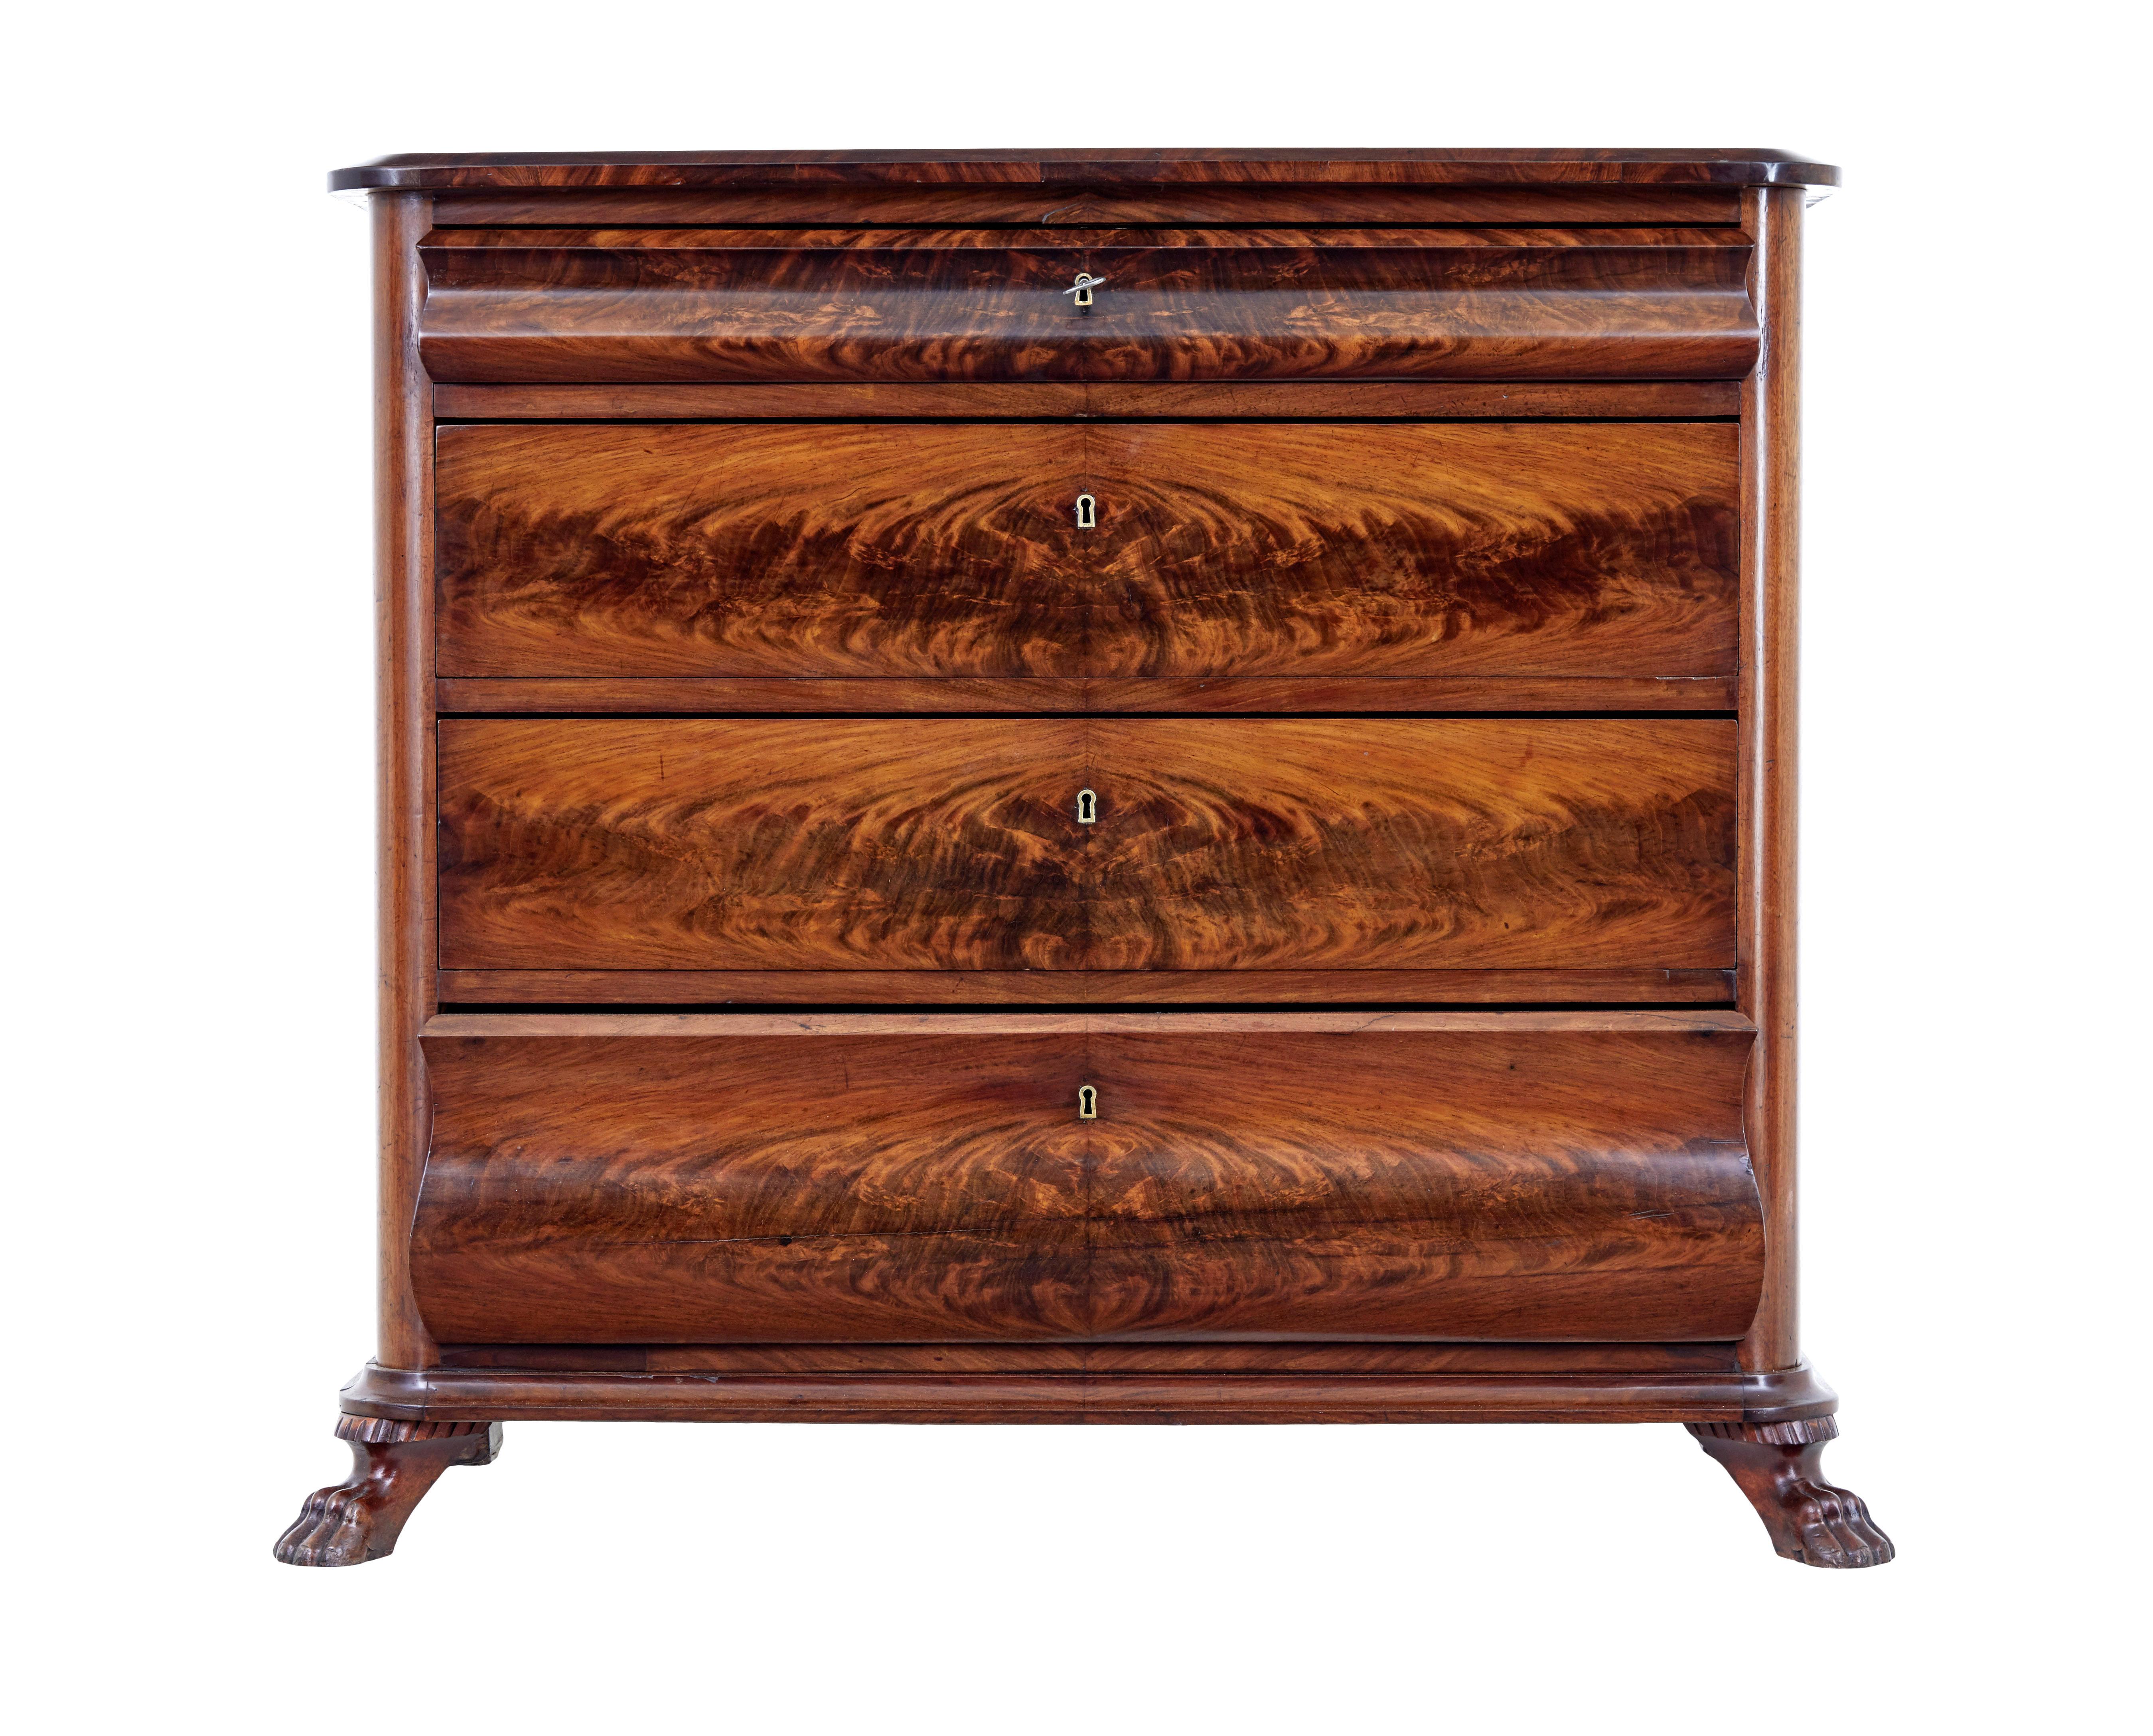 Danish mid 19th century flame mahogany chest of drawers circa 1850.

Stunning mid 19th century 4 drawer commode from Denmark.

Rectangular top with sloped moulded edge.  Below the top the chest is fitted with 4 graduating drawers, the top and bottom